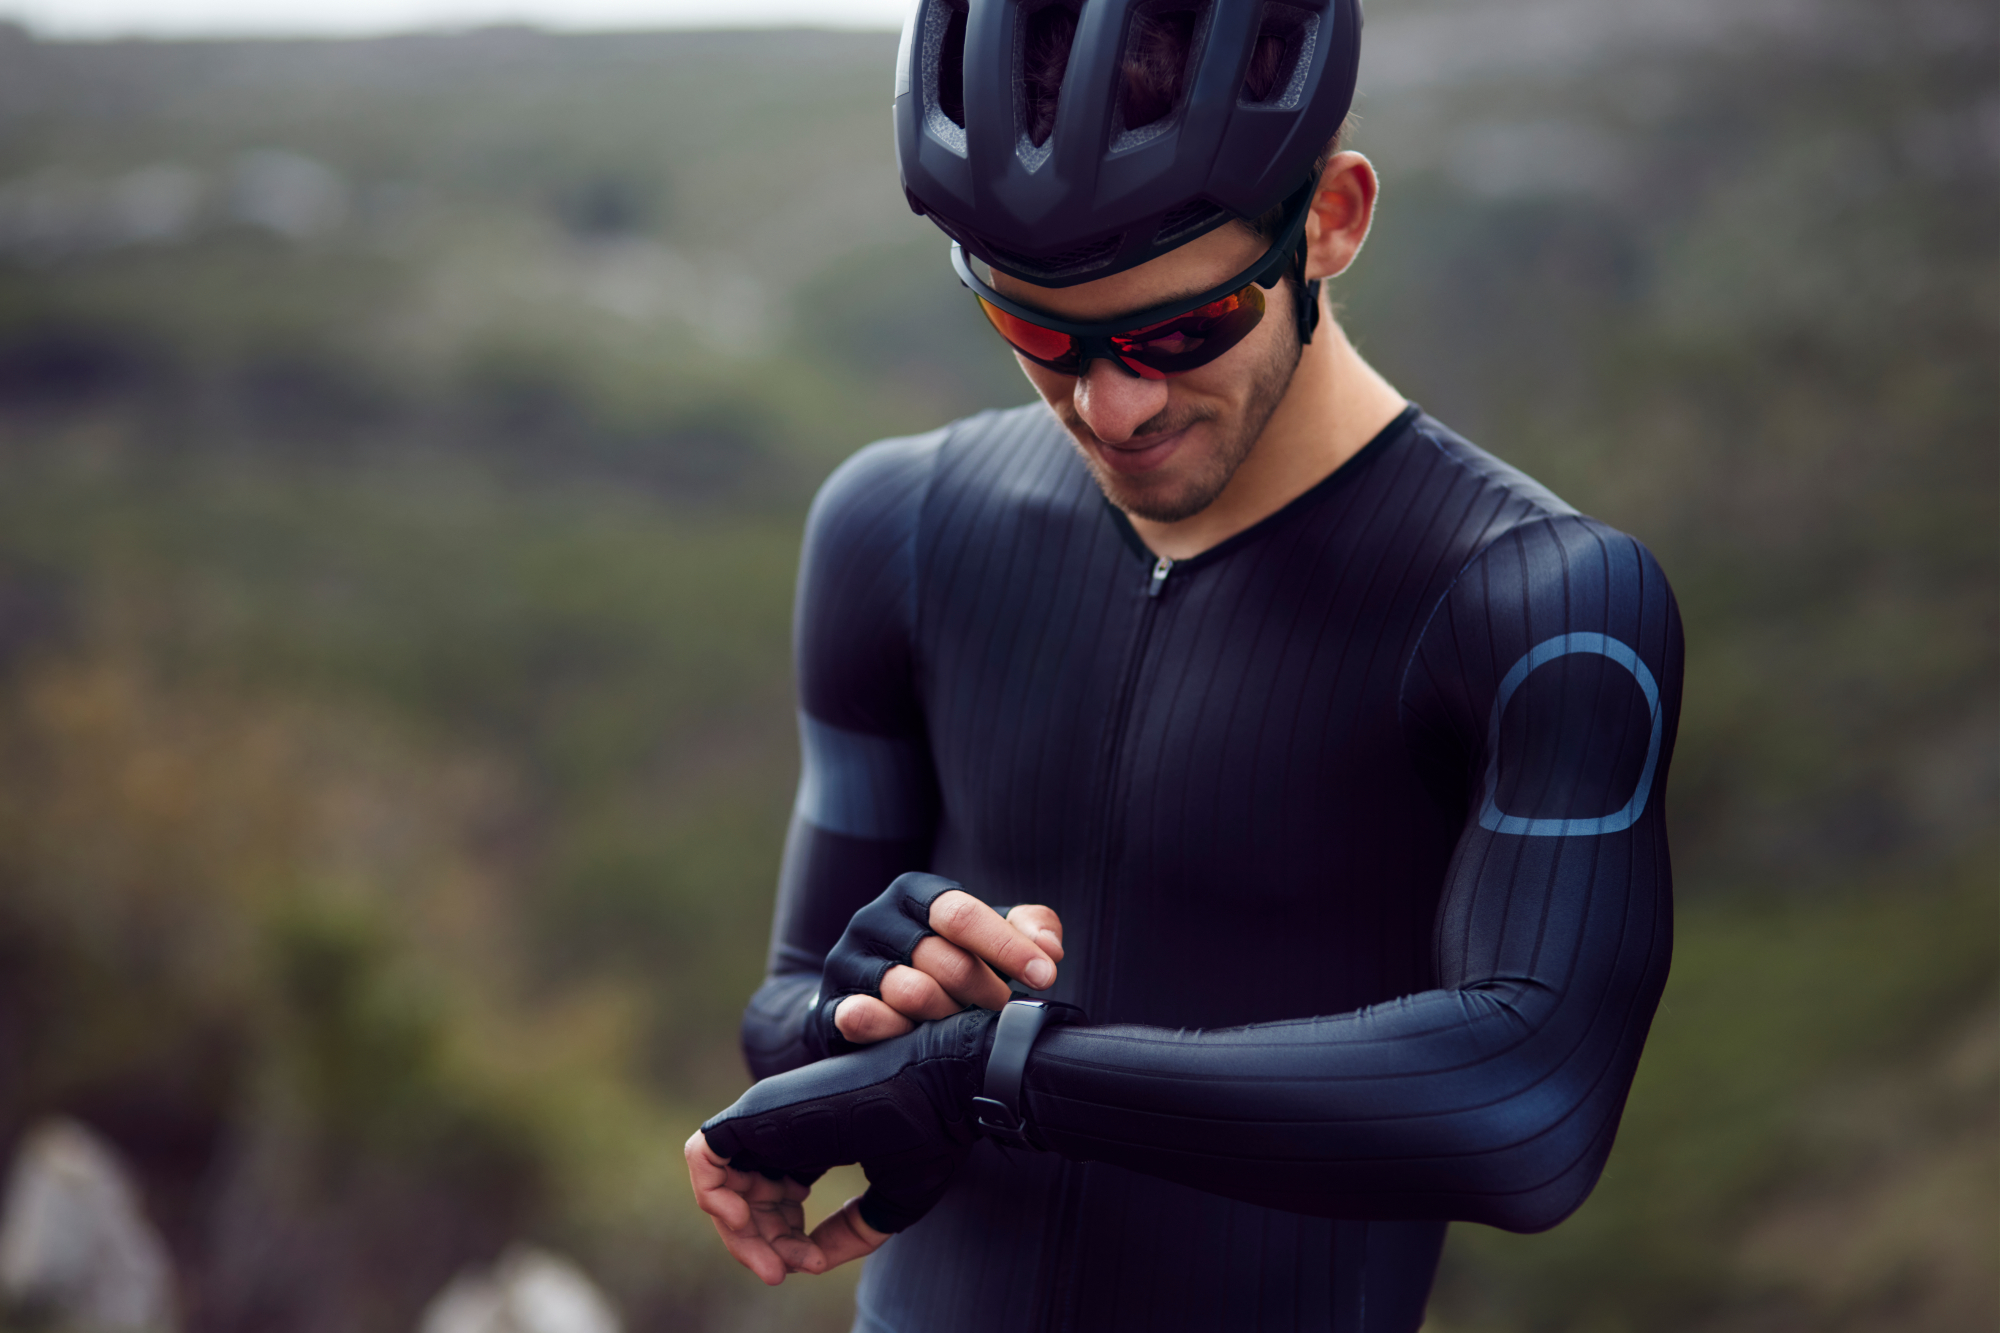 Image shows rider with a smartwatch